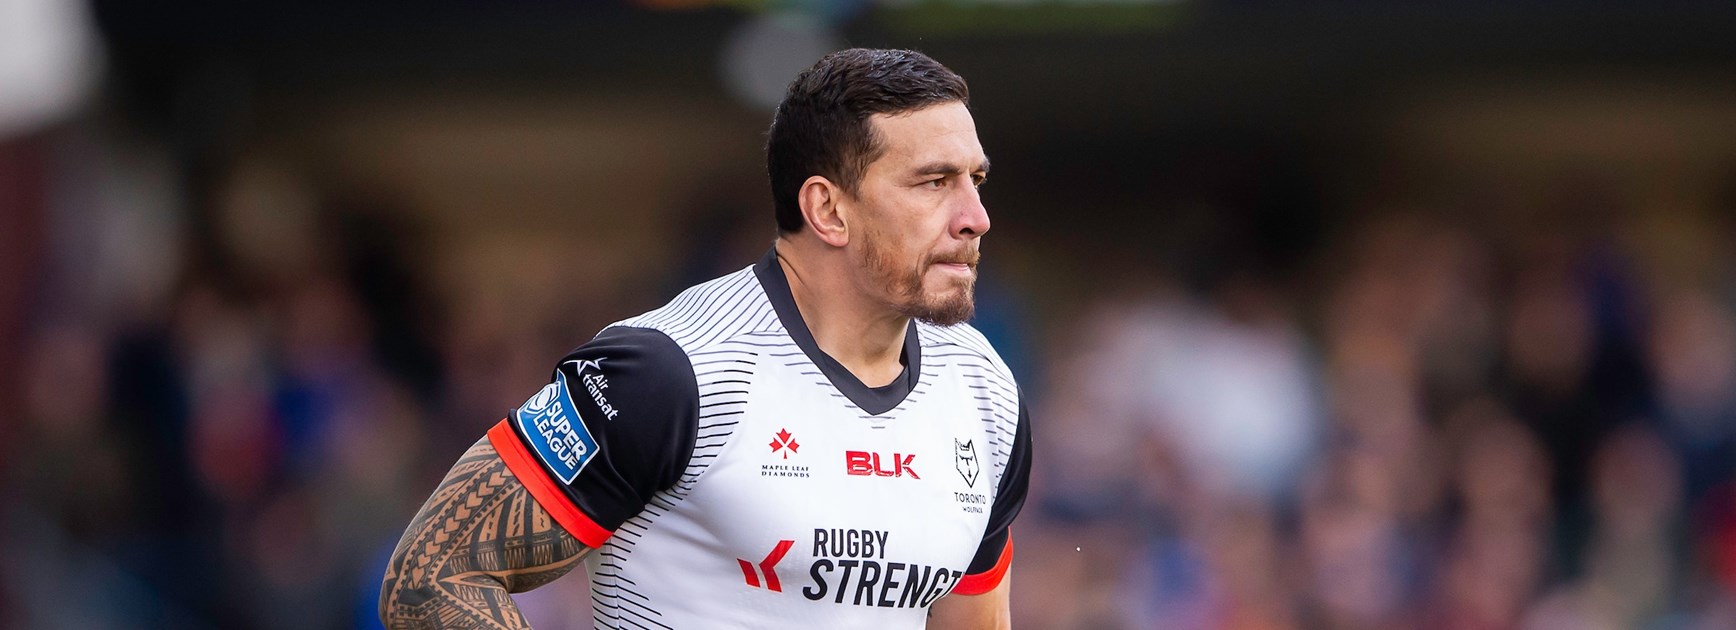 Wolfpack wobble but SBW promises the magic will come